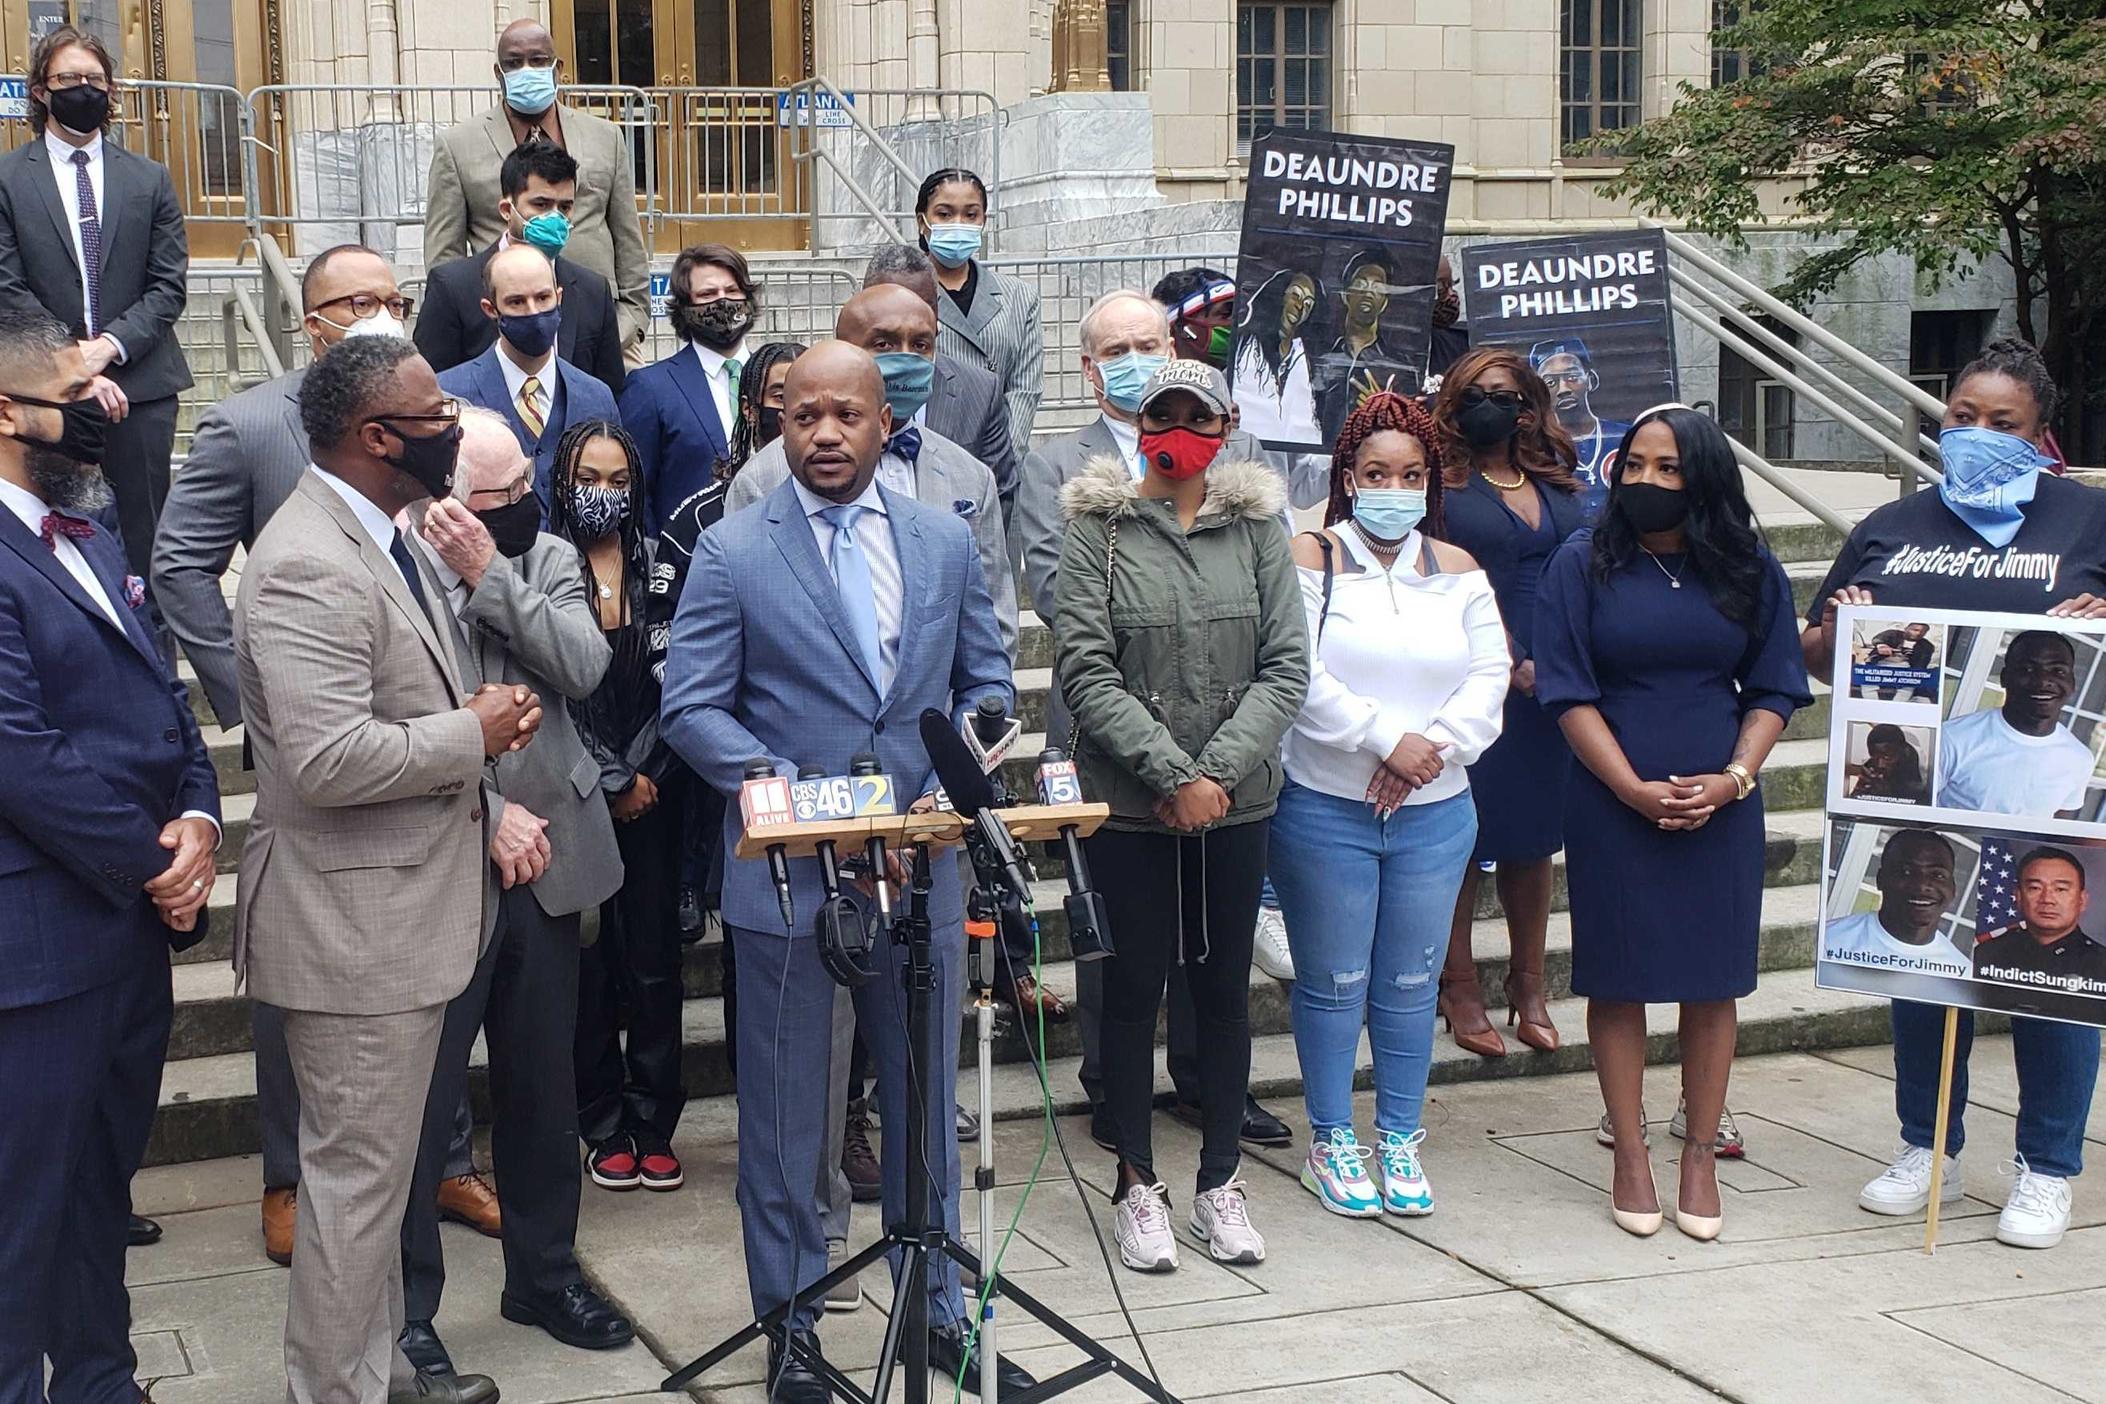 Civil rights attorney L. Chris Stewart joined other prominent Atlanta-area attorneys and victim's families in demanding reforms from Mayor Keisha Lance Bottoms and the city of Atlanta regarding police conduct.